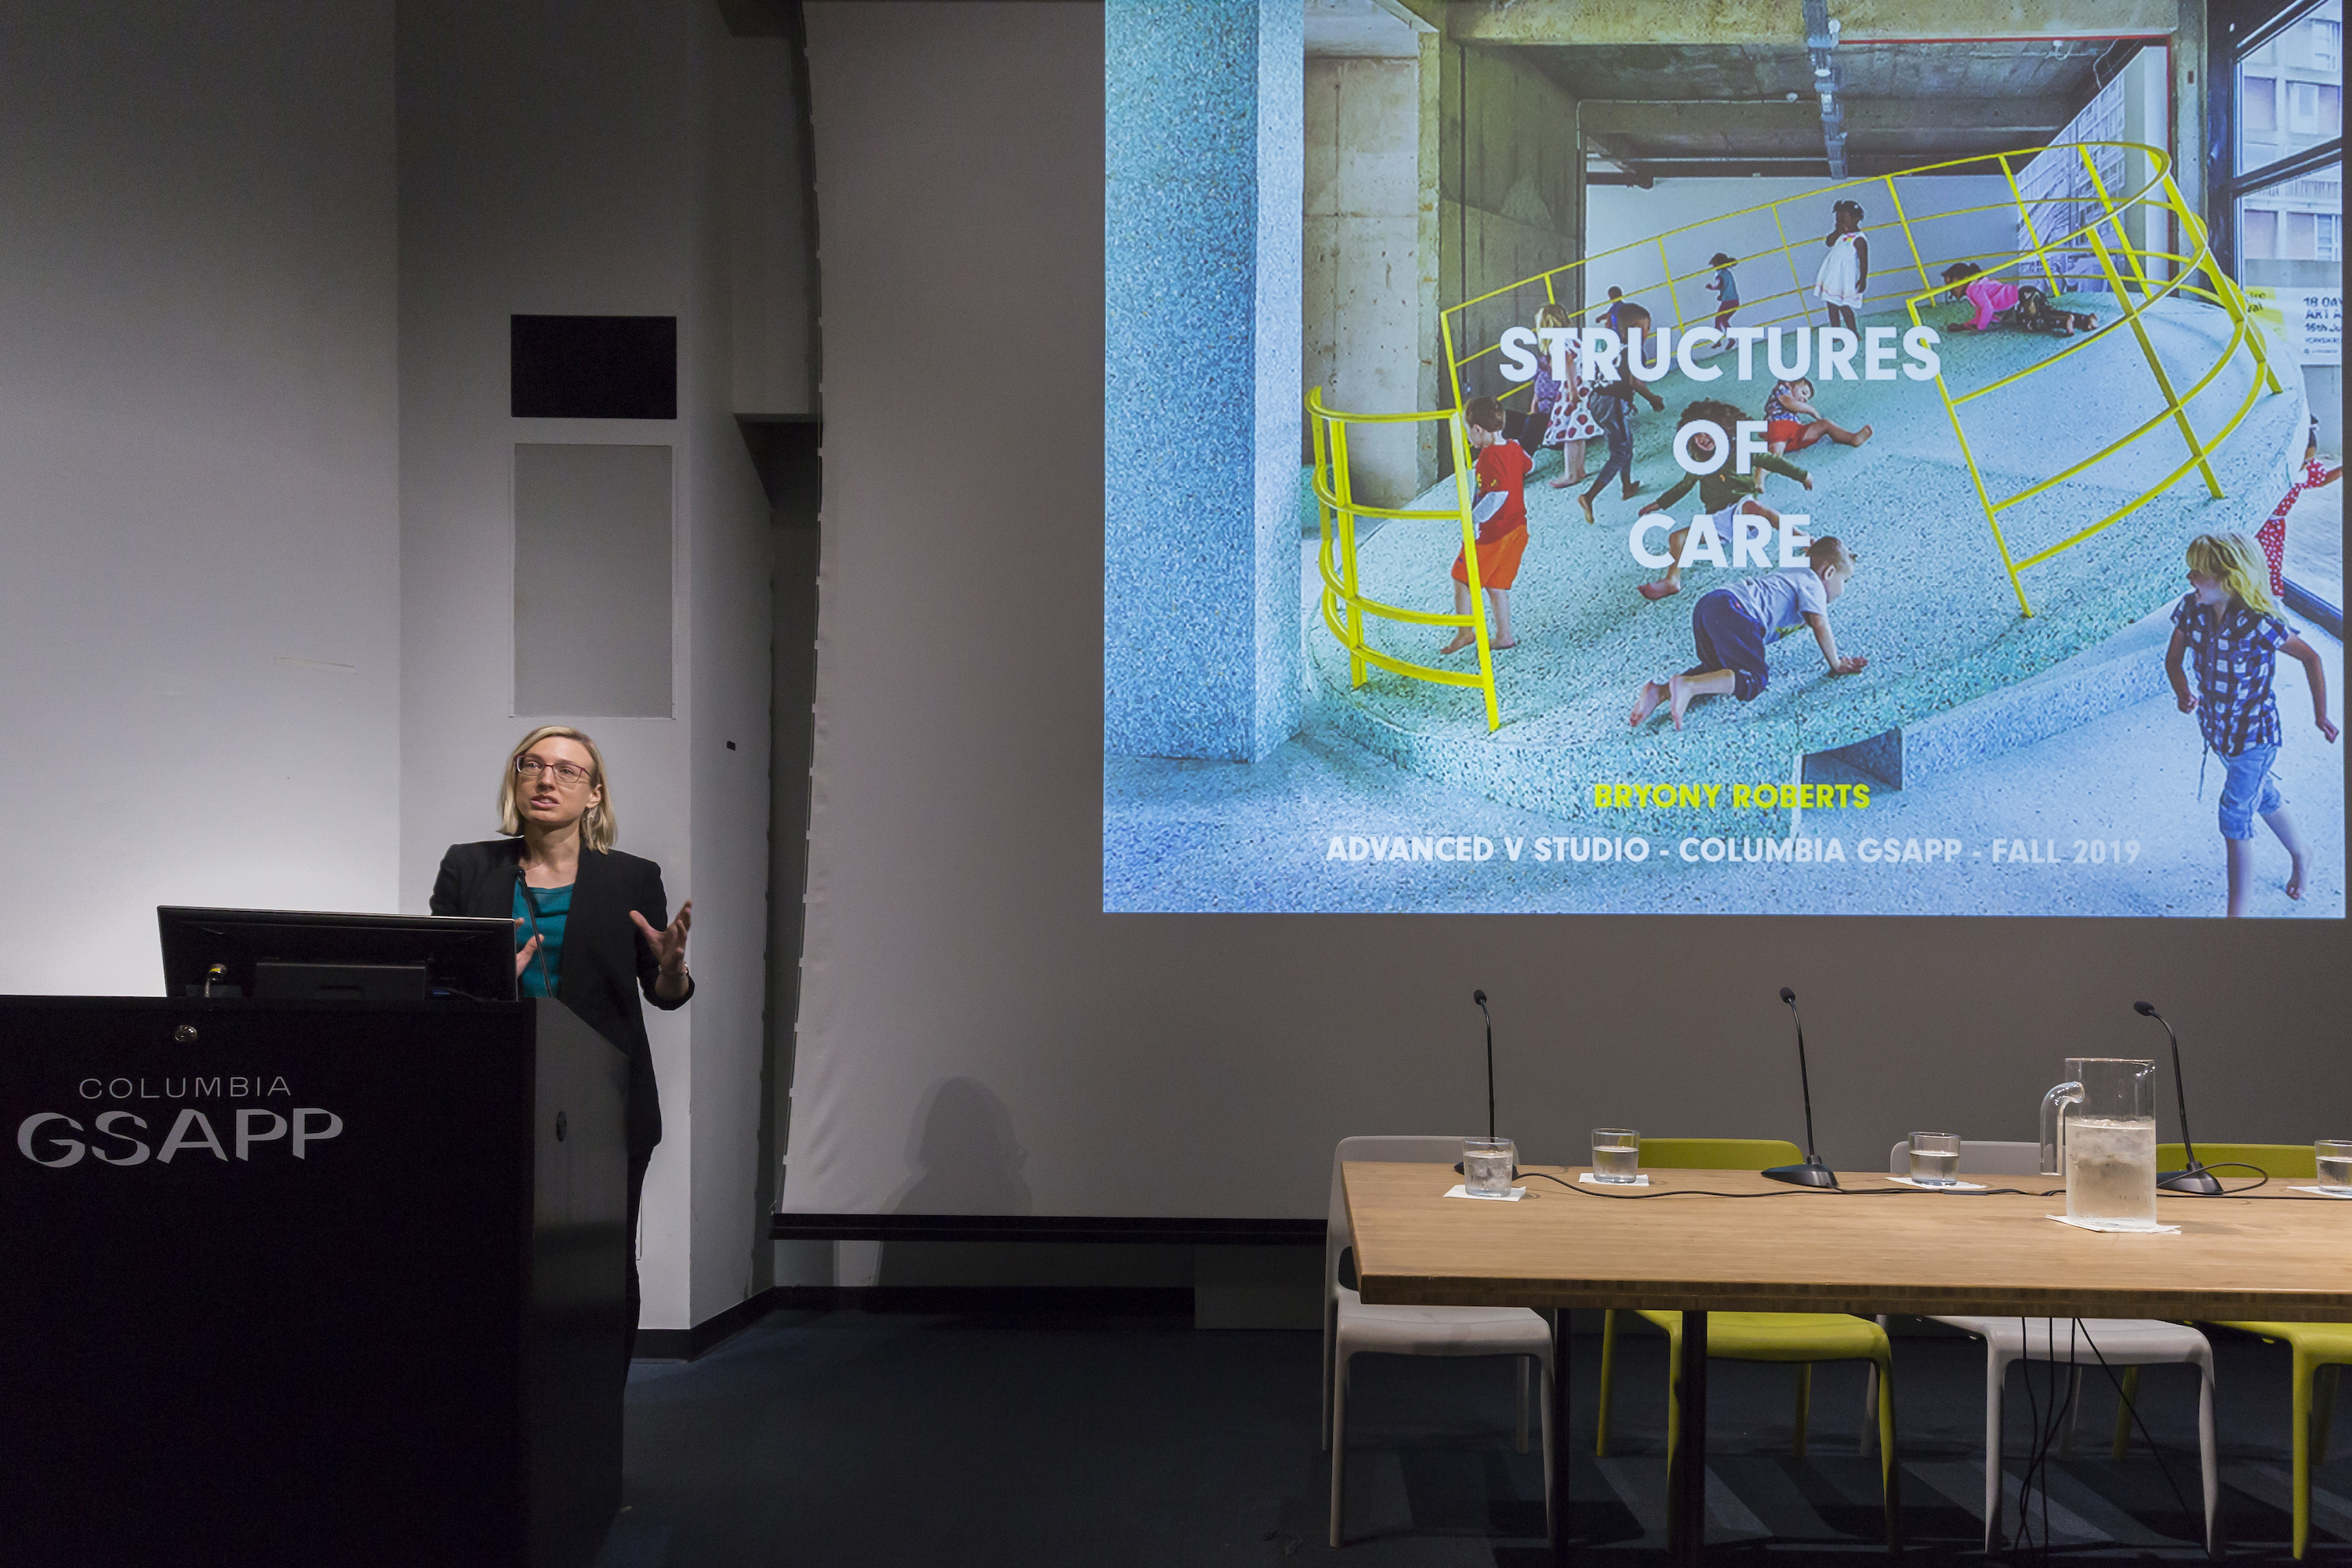 Bryony Roberts presenting "Structures of Care" part of Advanced V Studio at Columbia GSAPP, Fall 2019. 